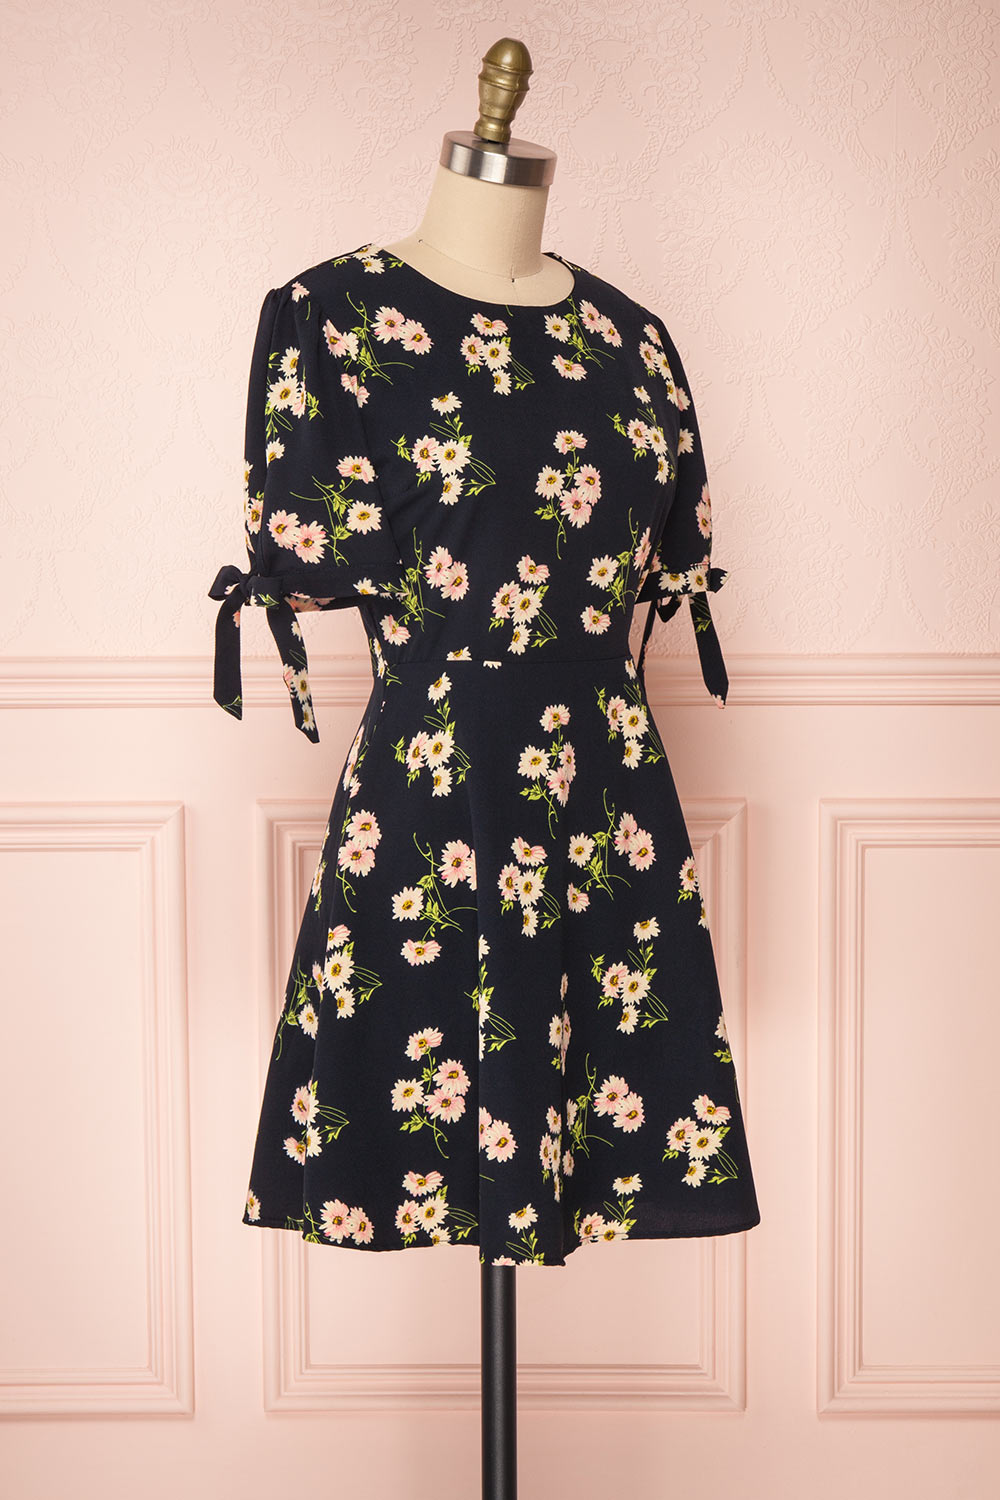 Yevtsye Navy Blue Floral A-Line Cocktail Dress | Boutique 1861 side view 